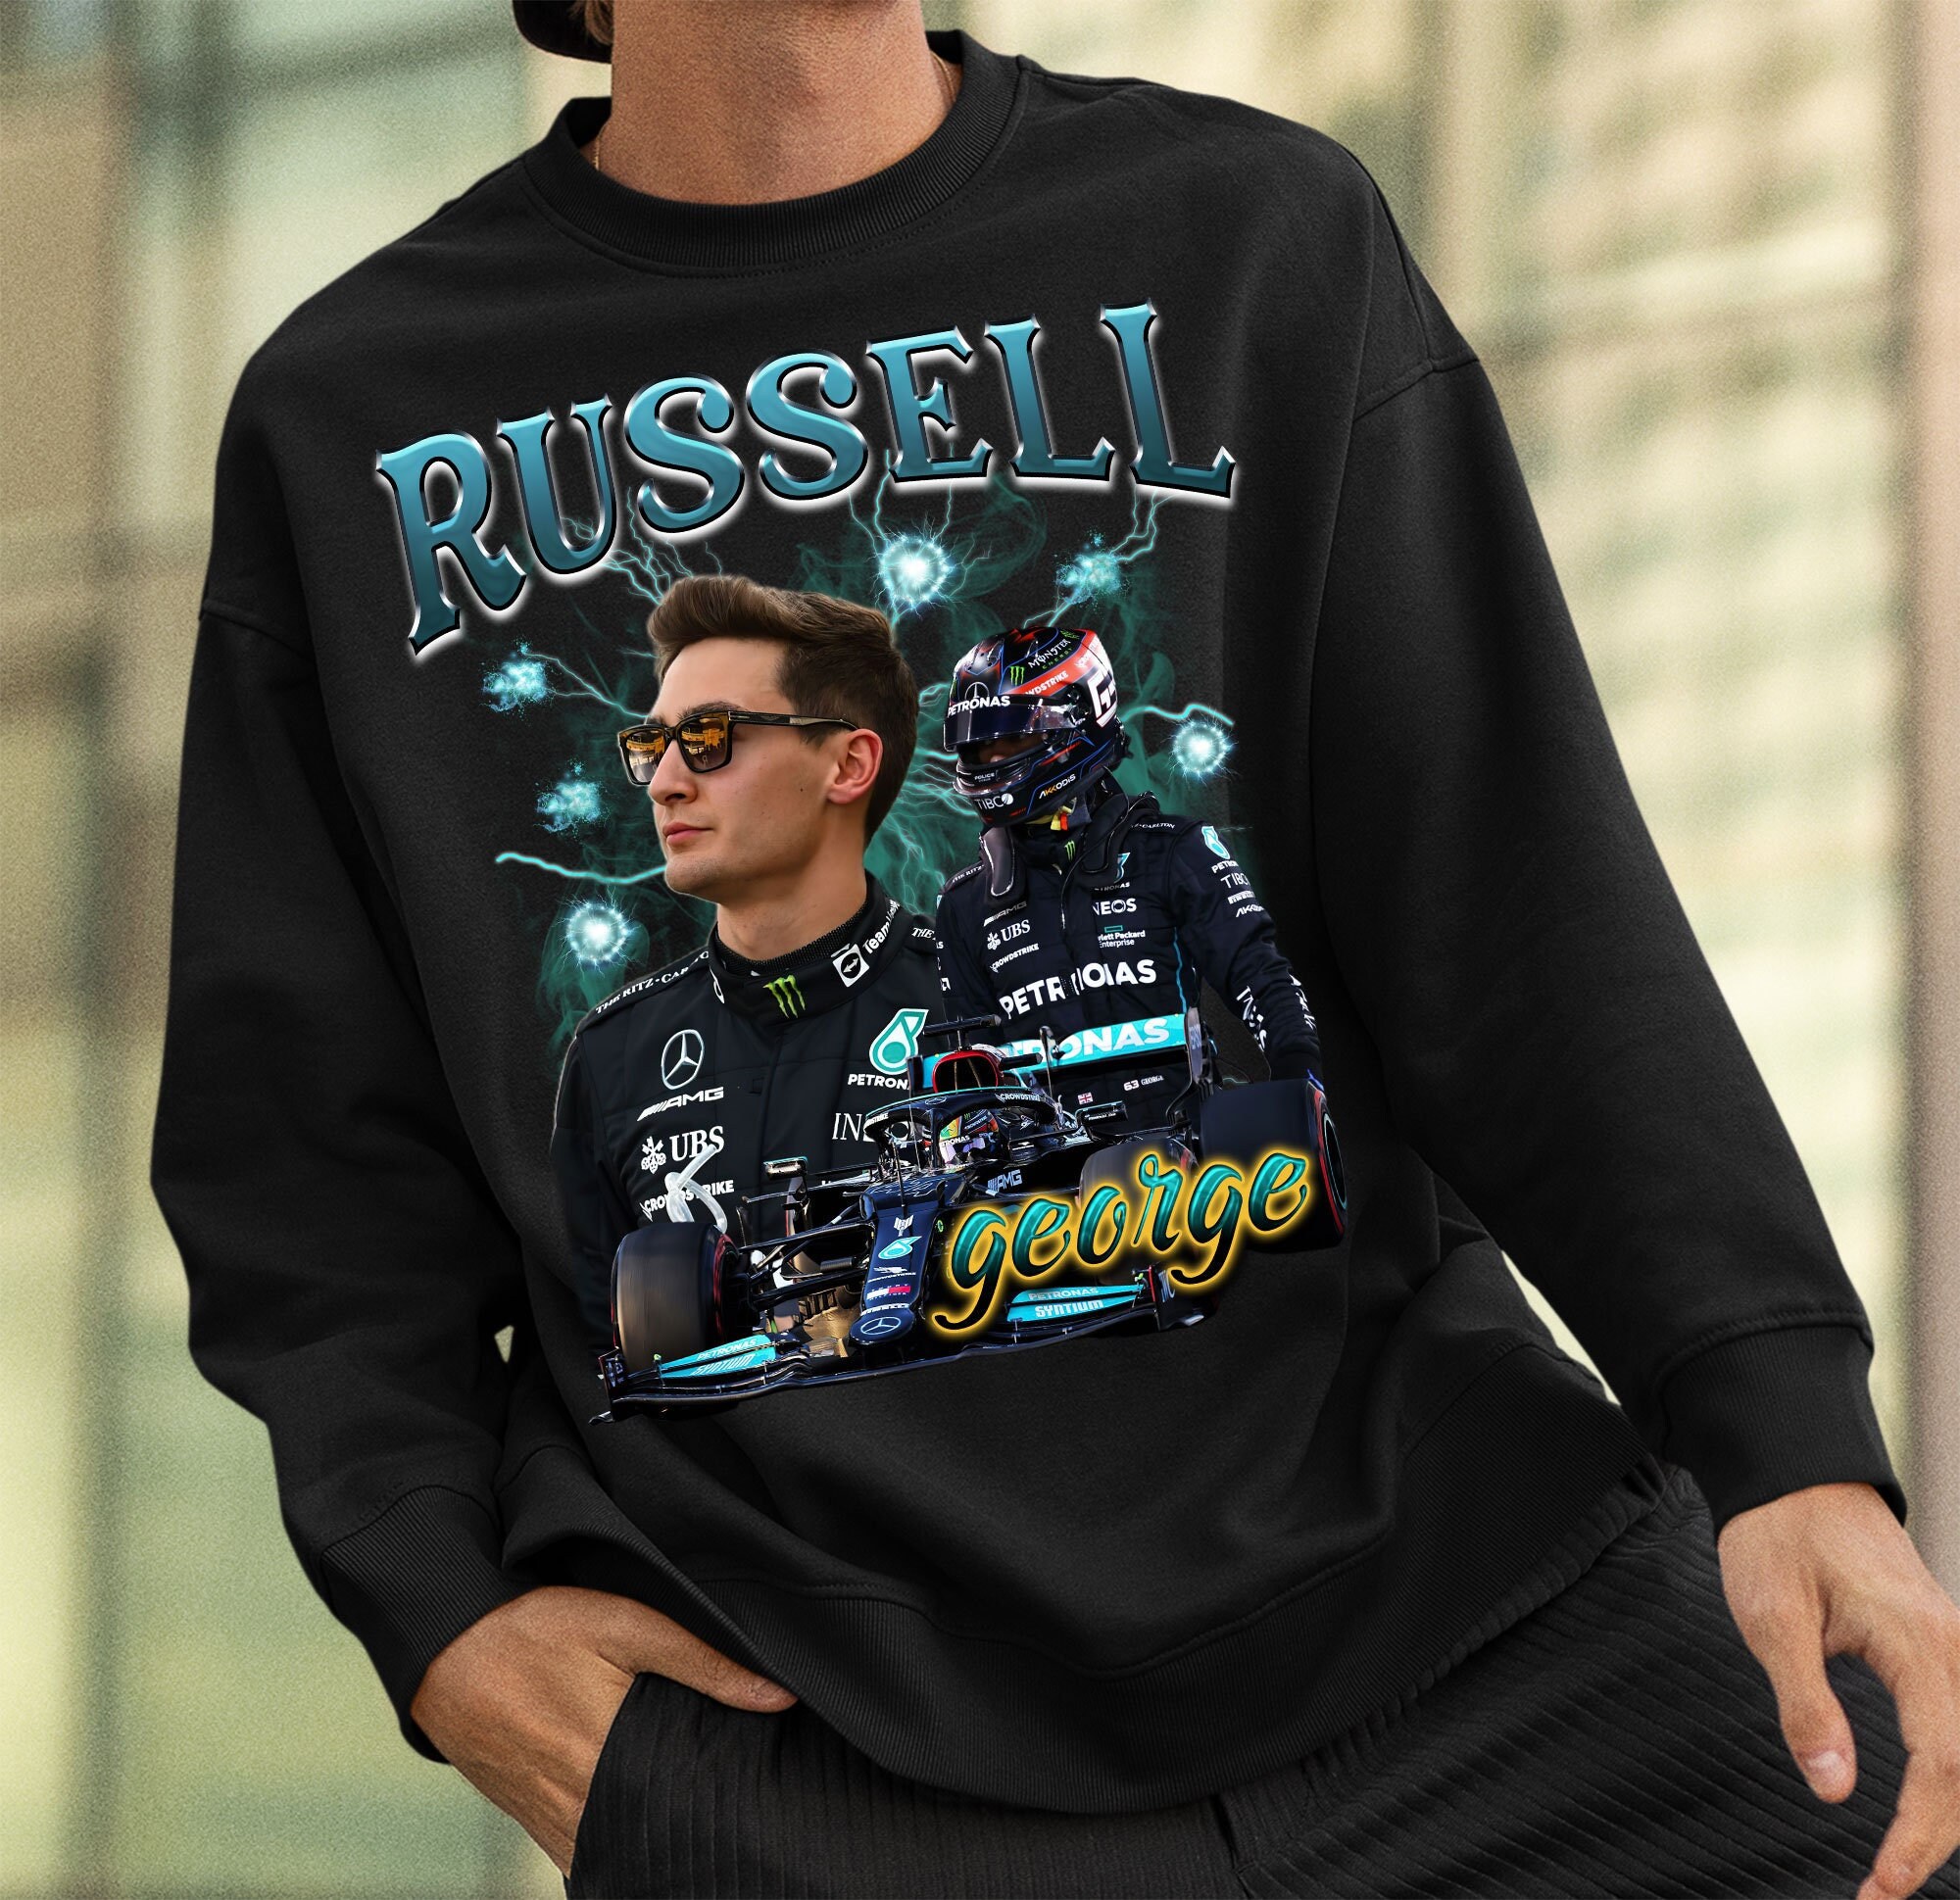 George Russell Mercedes RUS63 Driver Racing Championship Formula Shirt